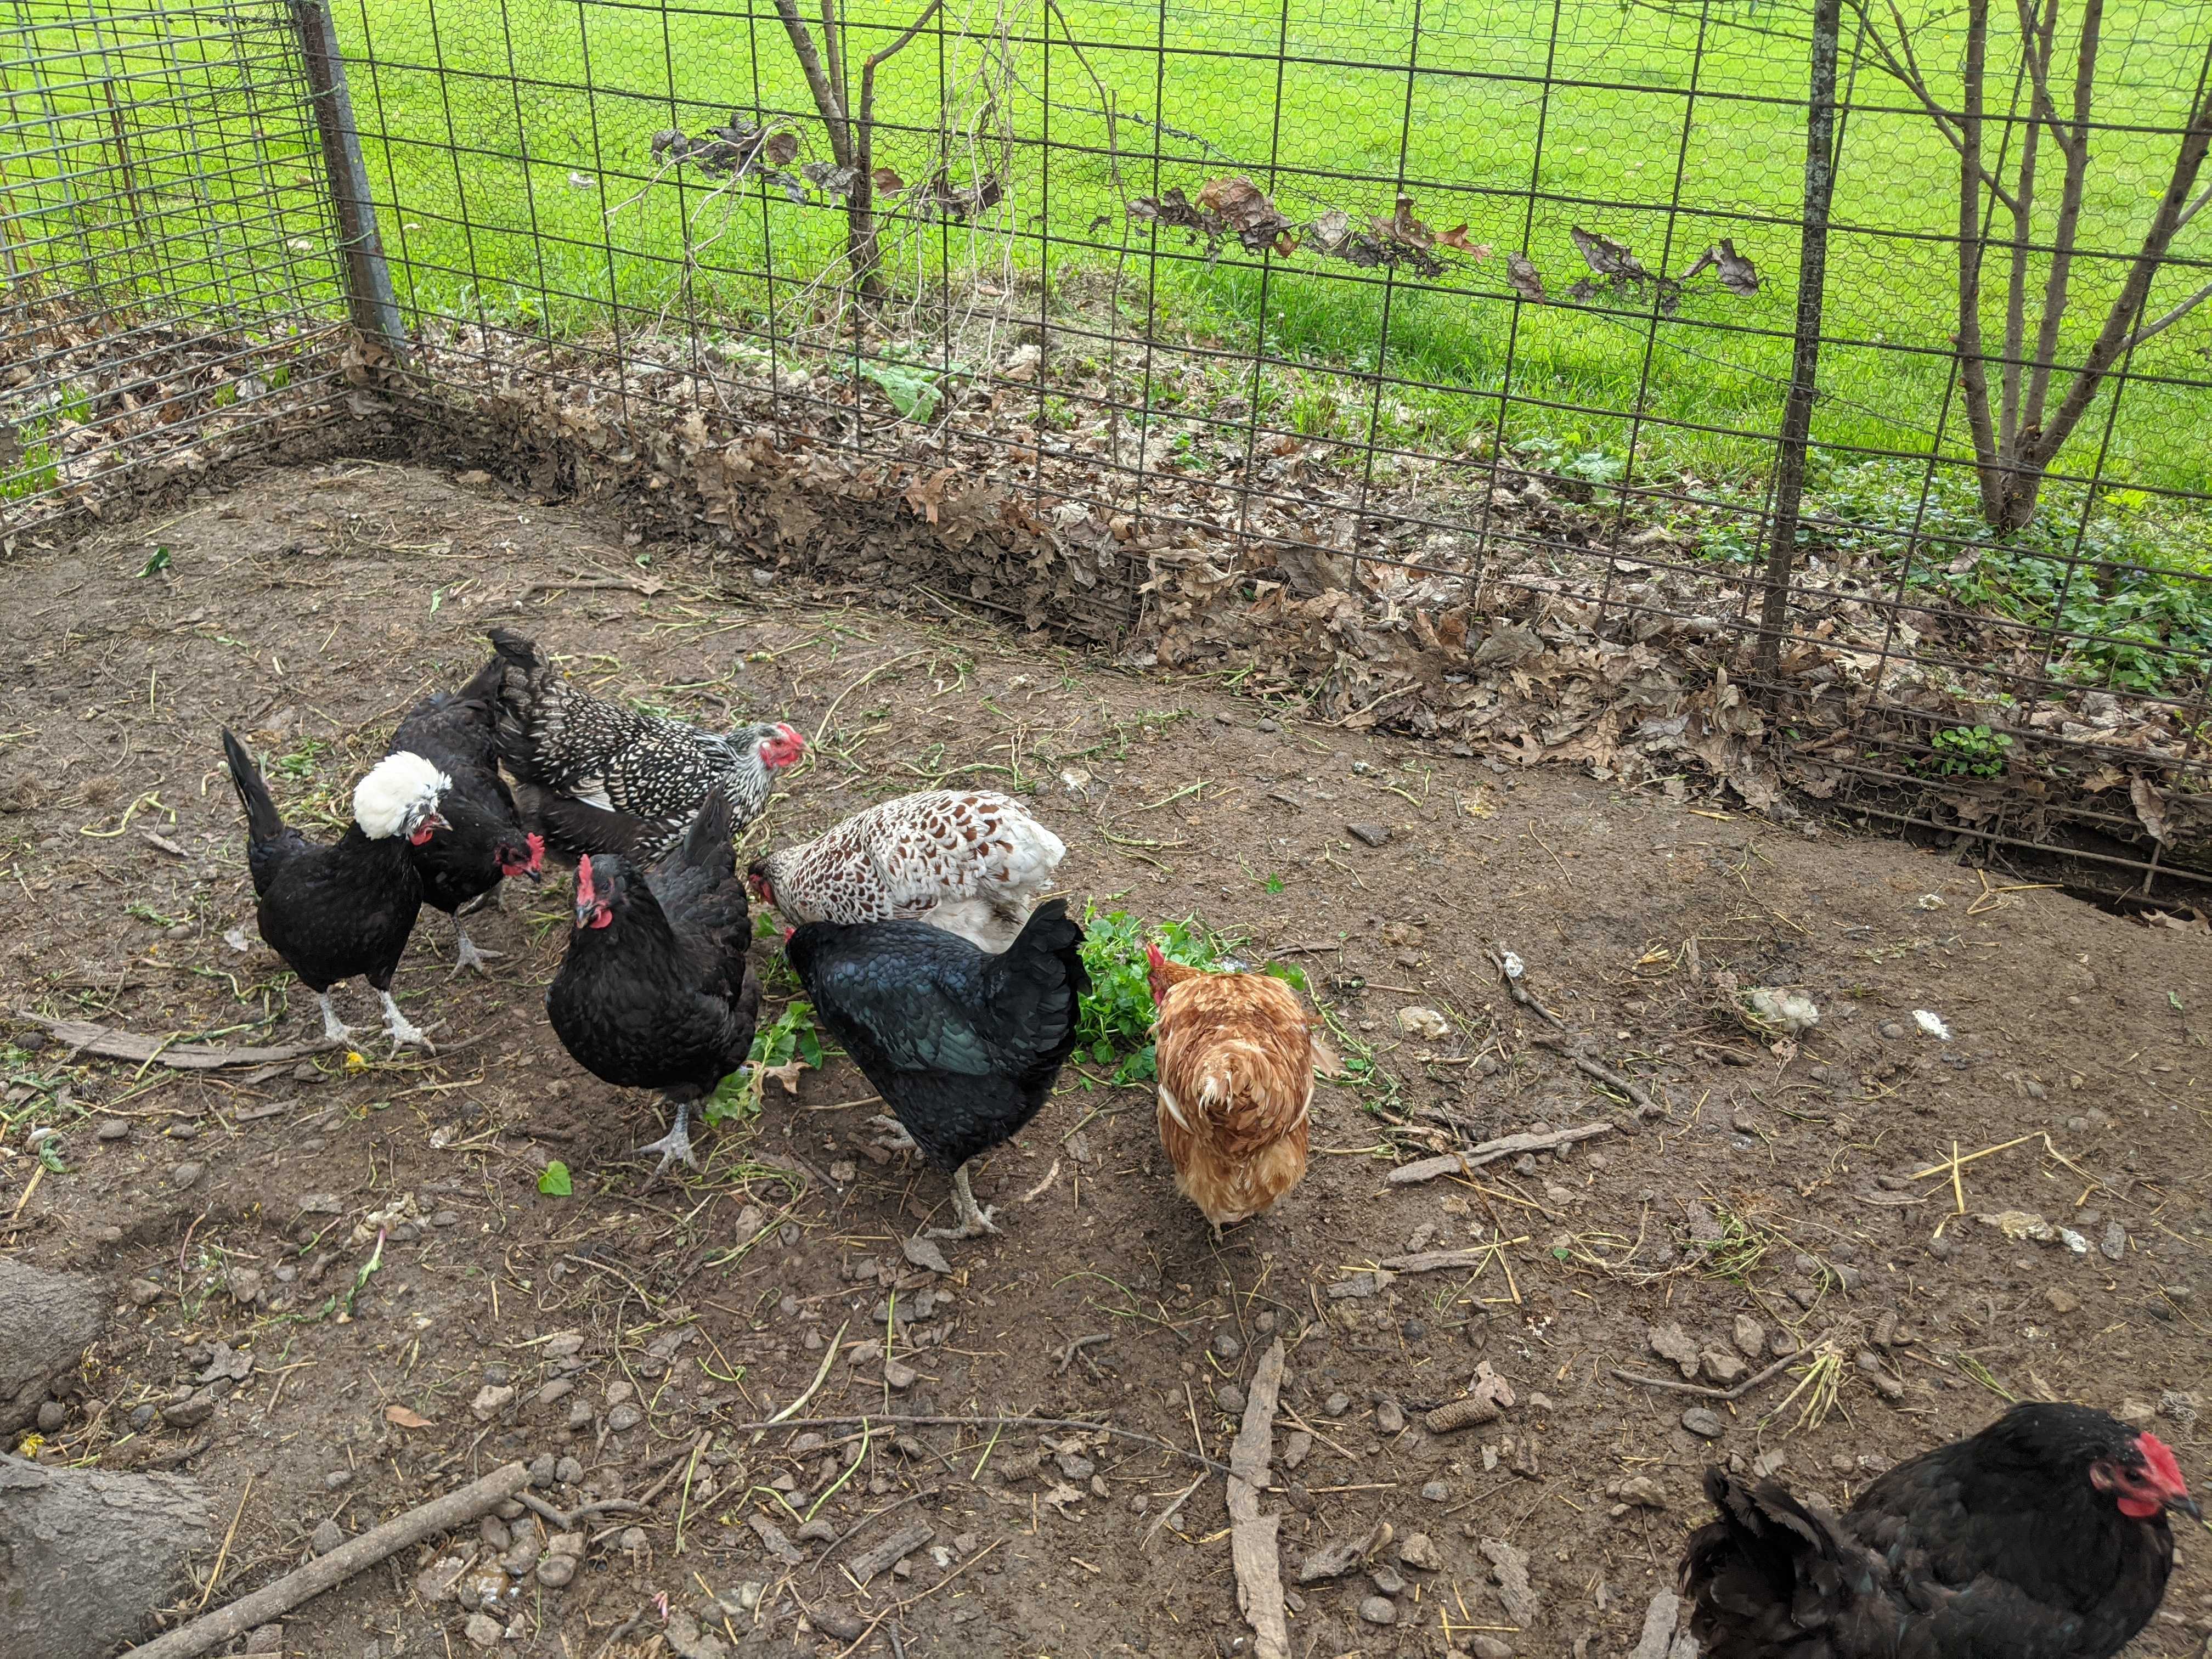 Poor forage quality in chicken run